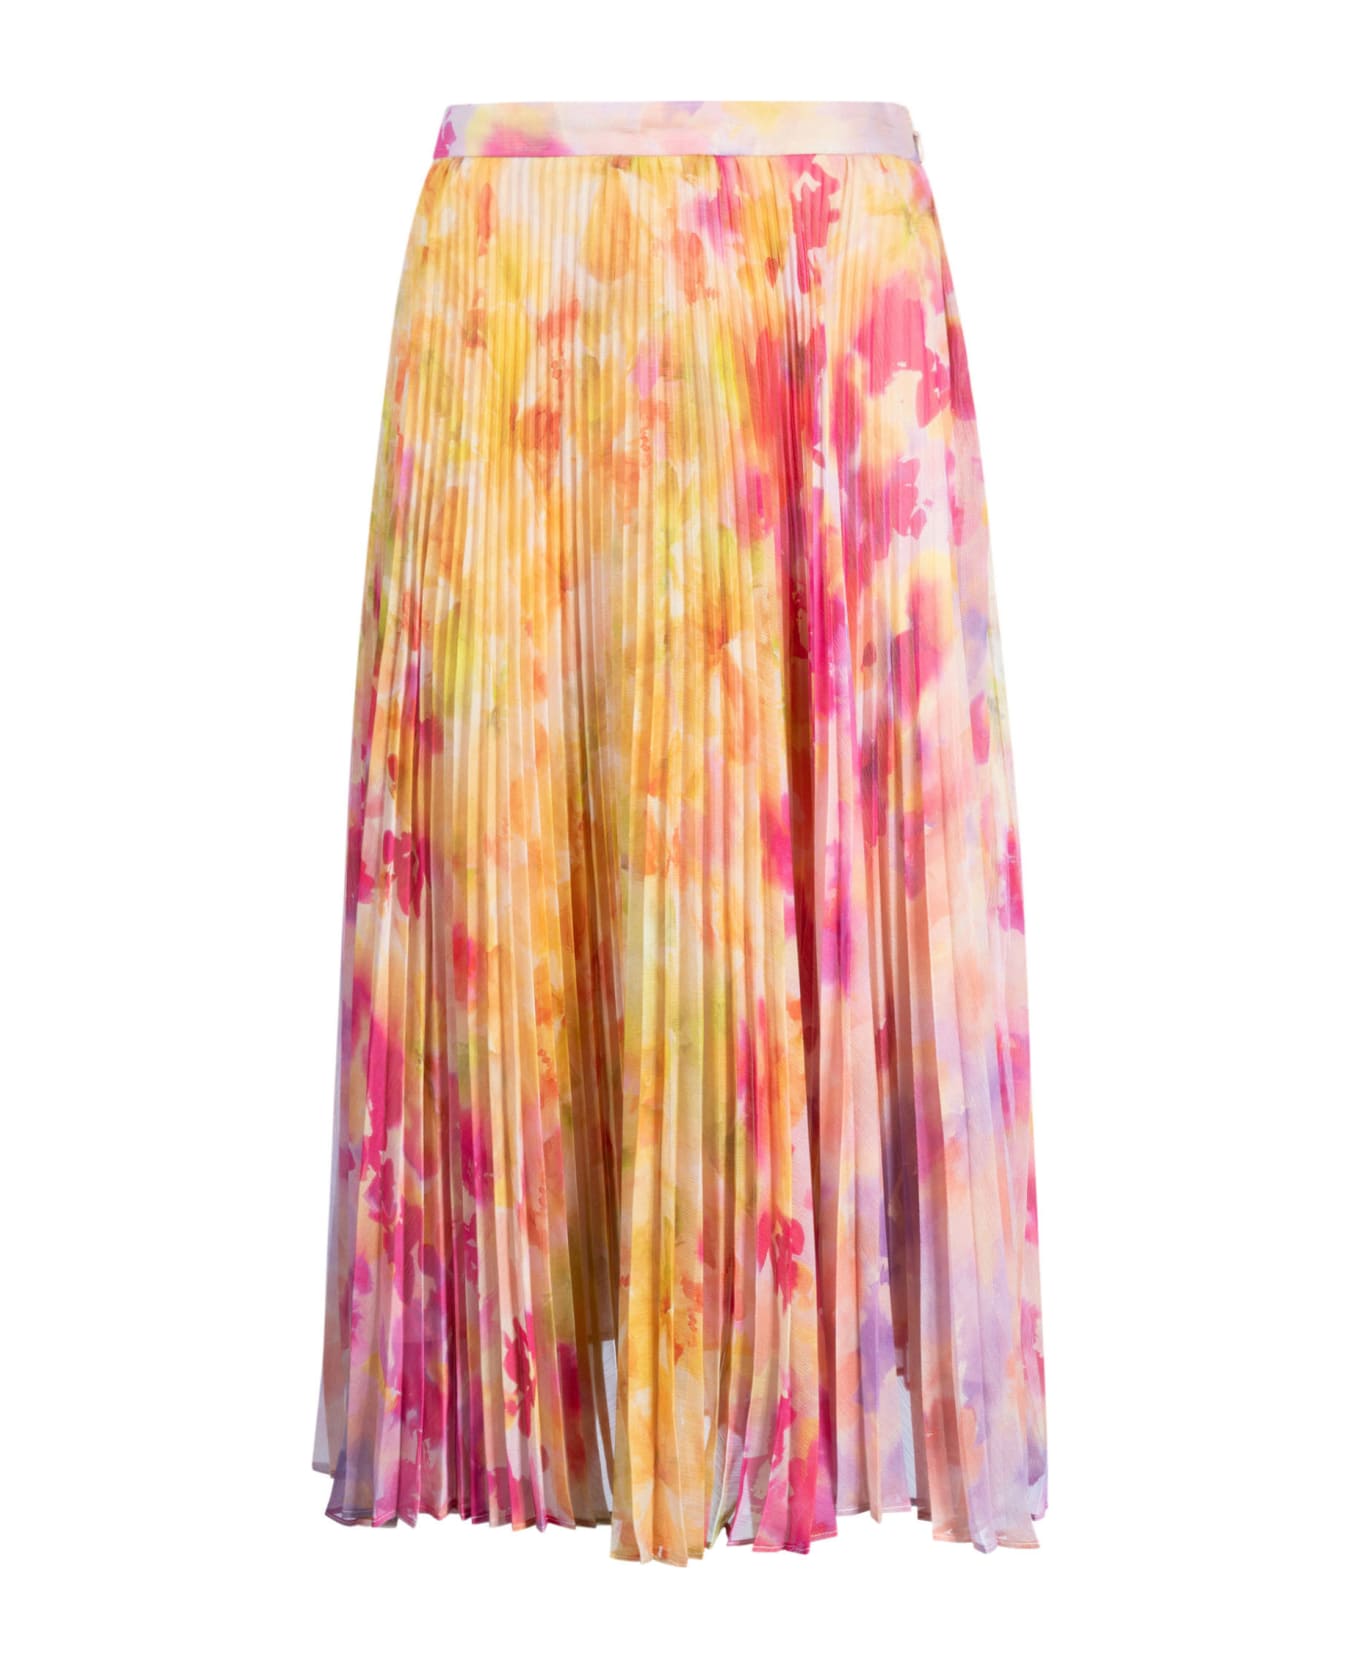 TwinSet Printed Floral Pleated Skirt - Multicolor